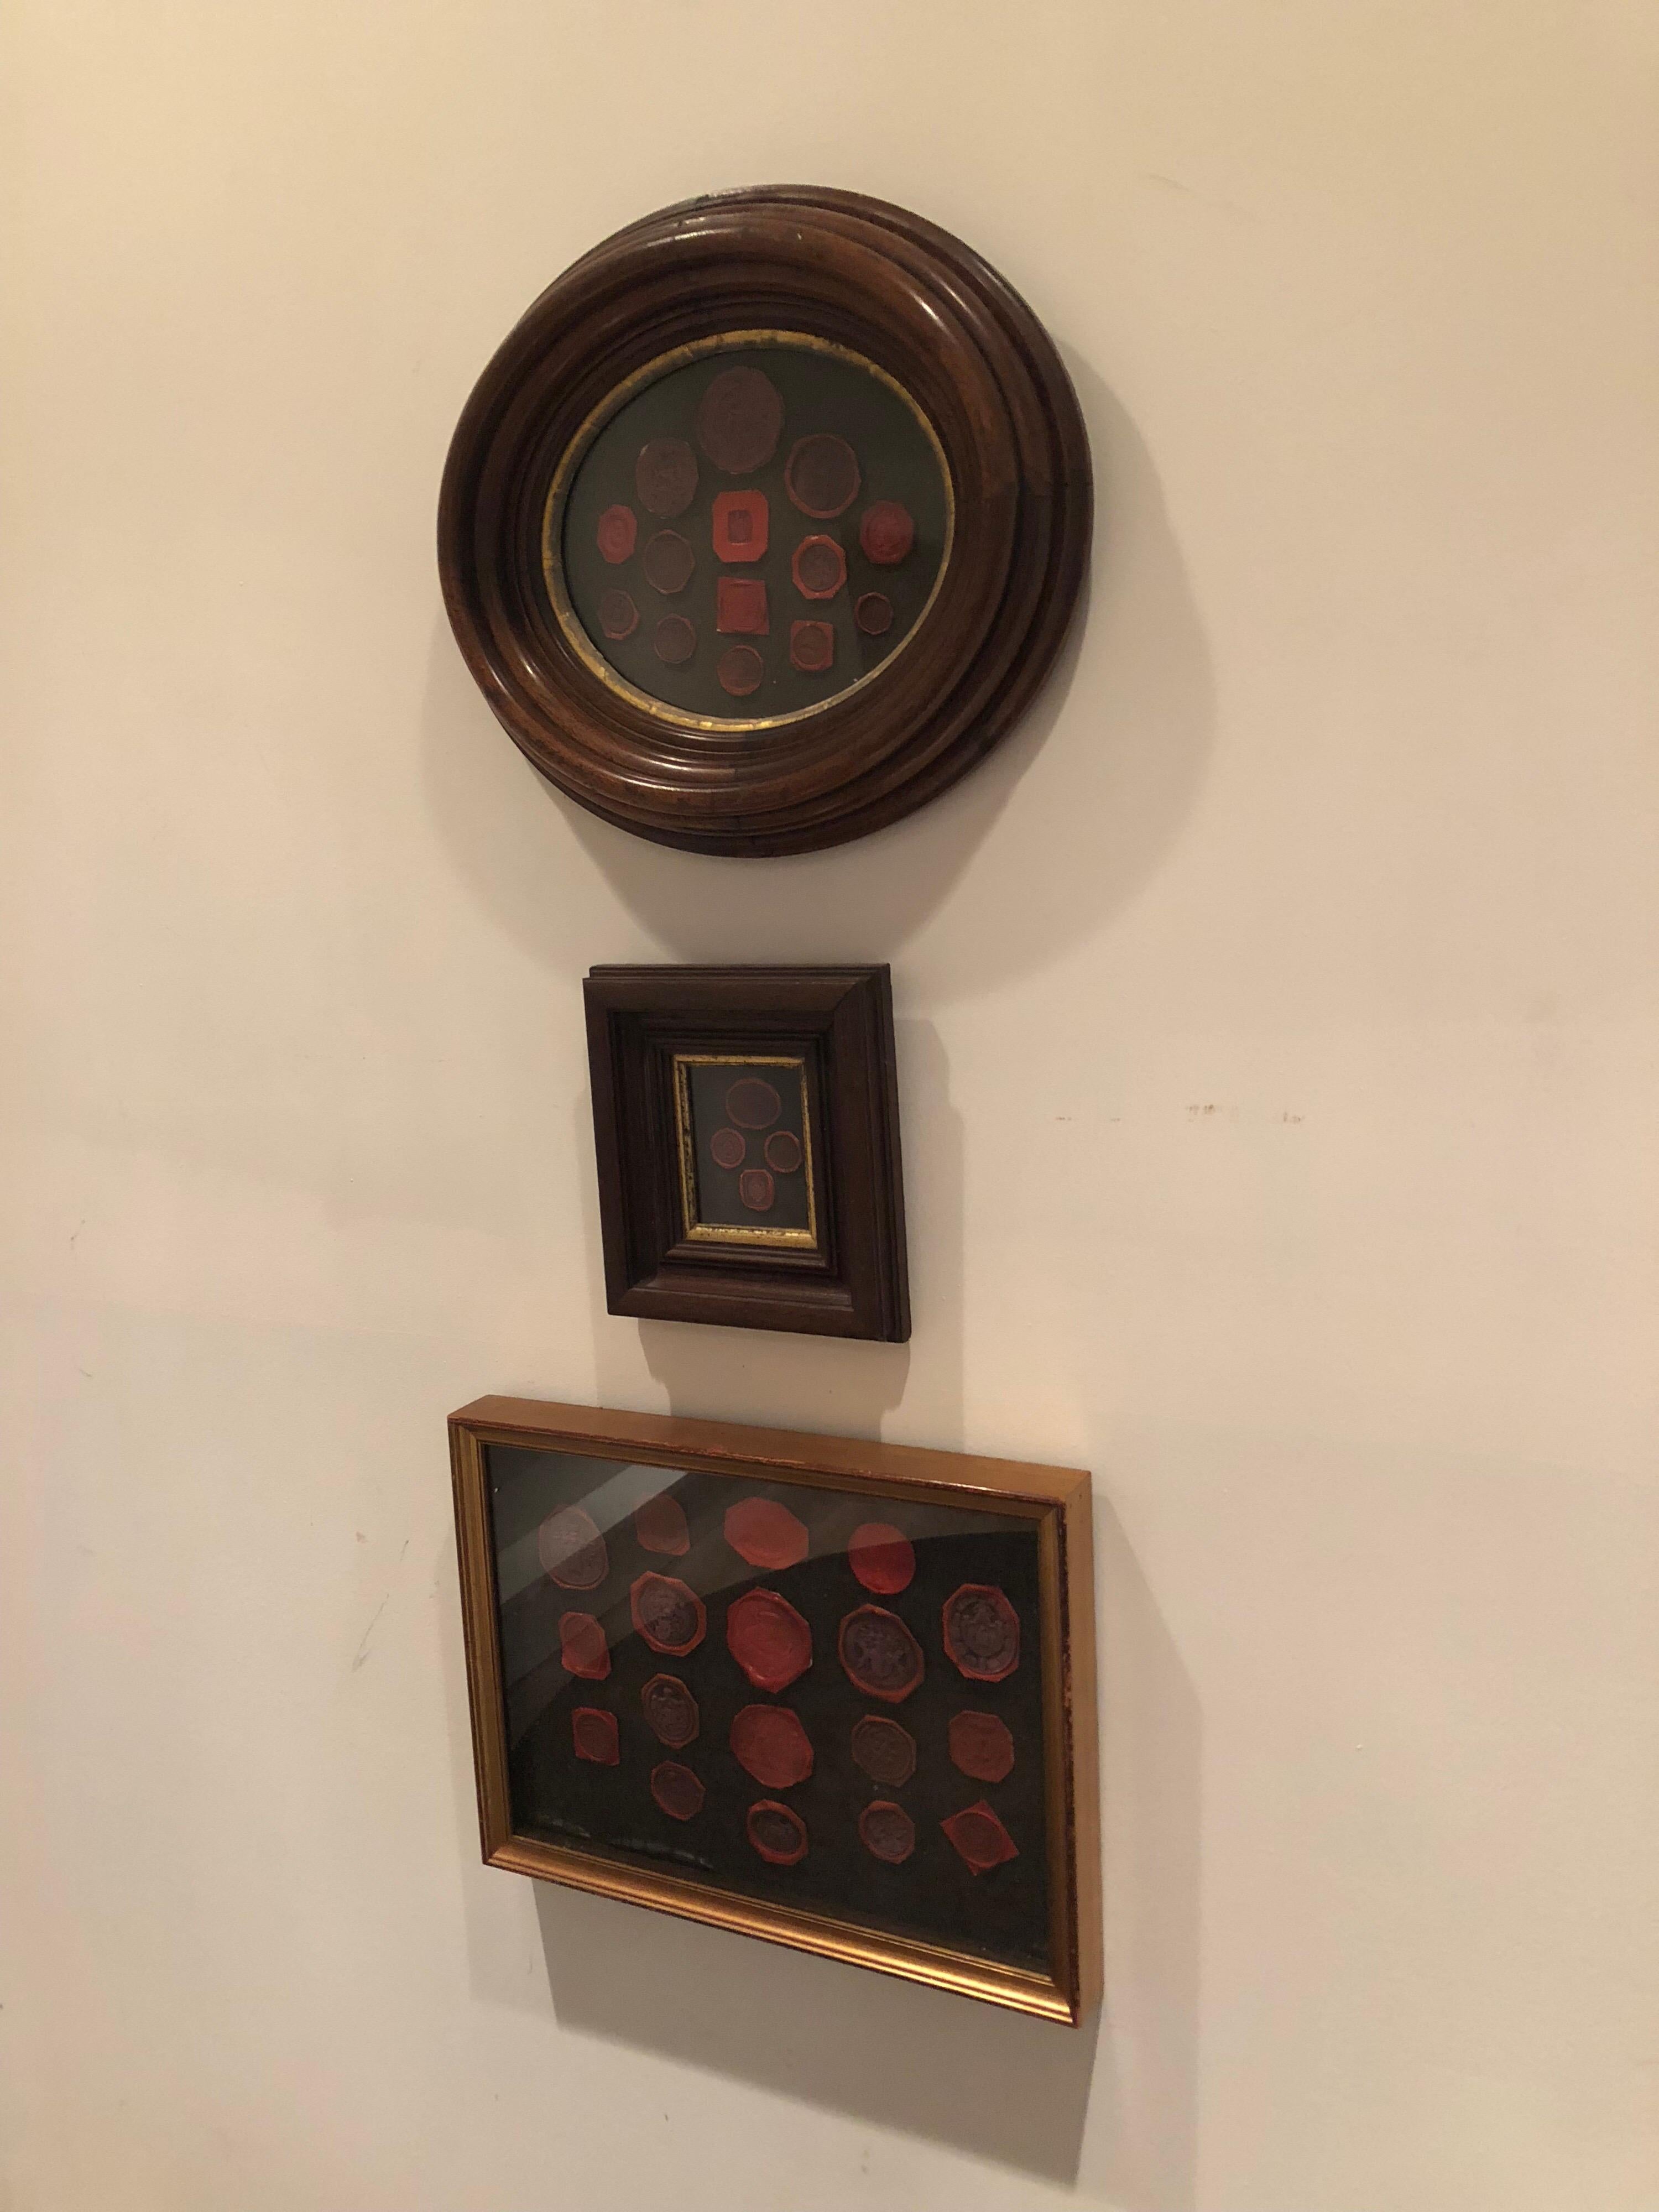 A collection of early 19th century wax seals framed.
Small frame measures 7.5